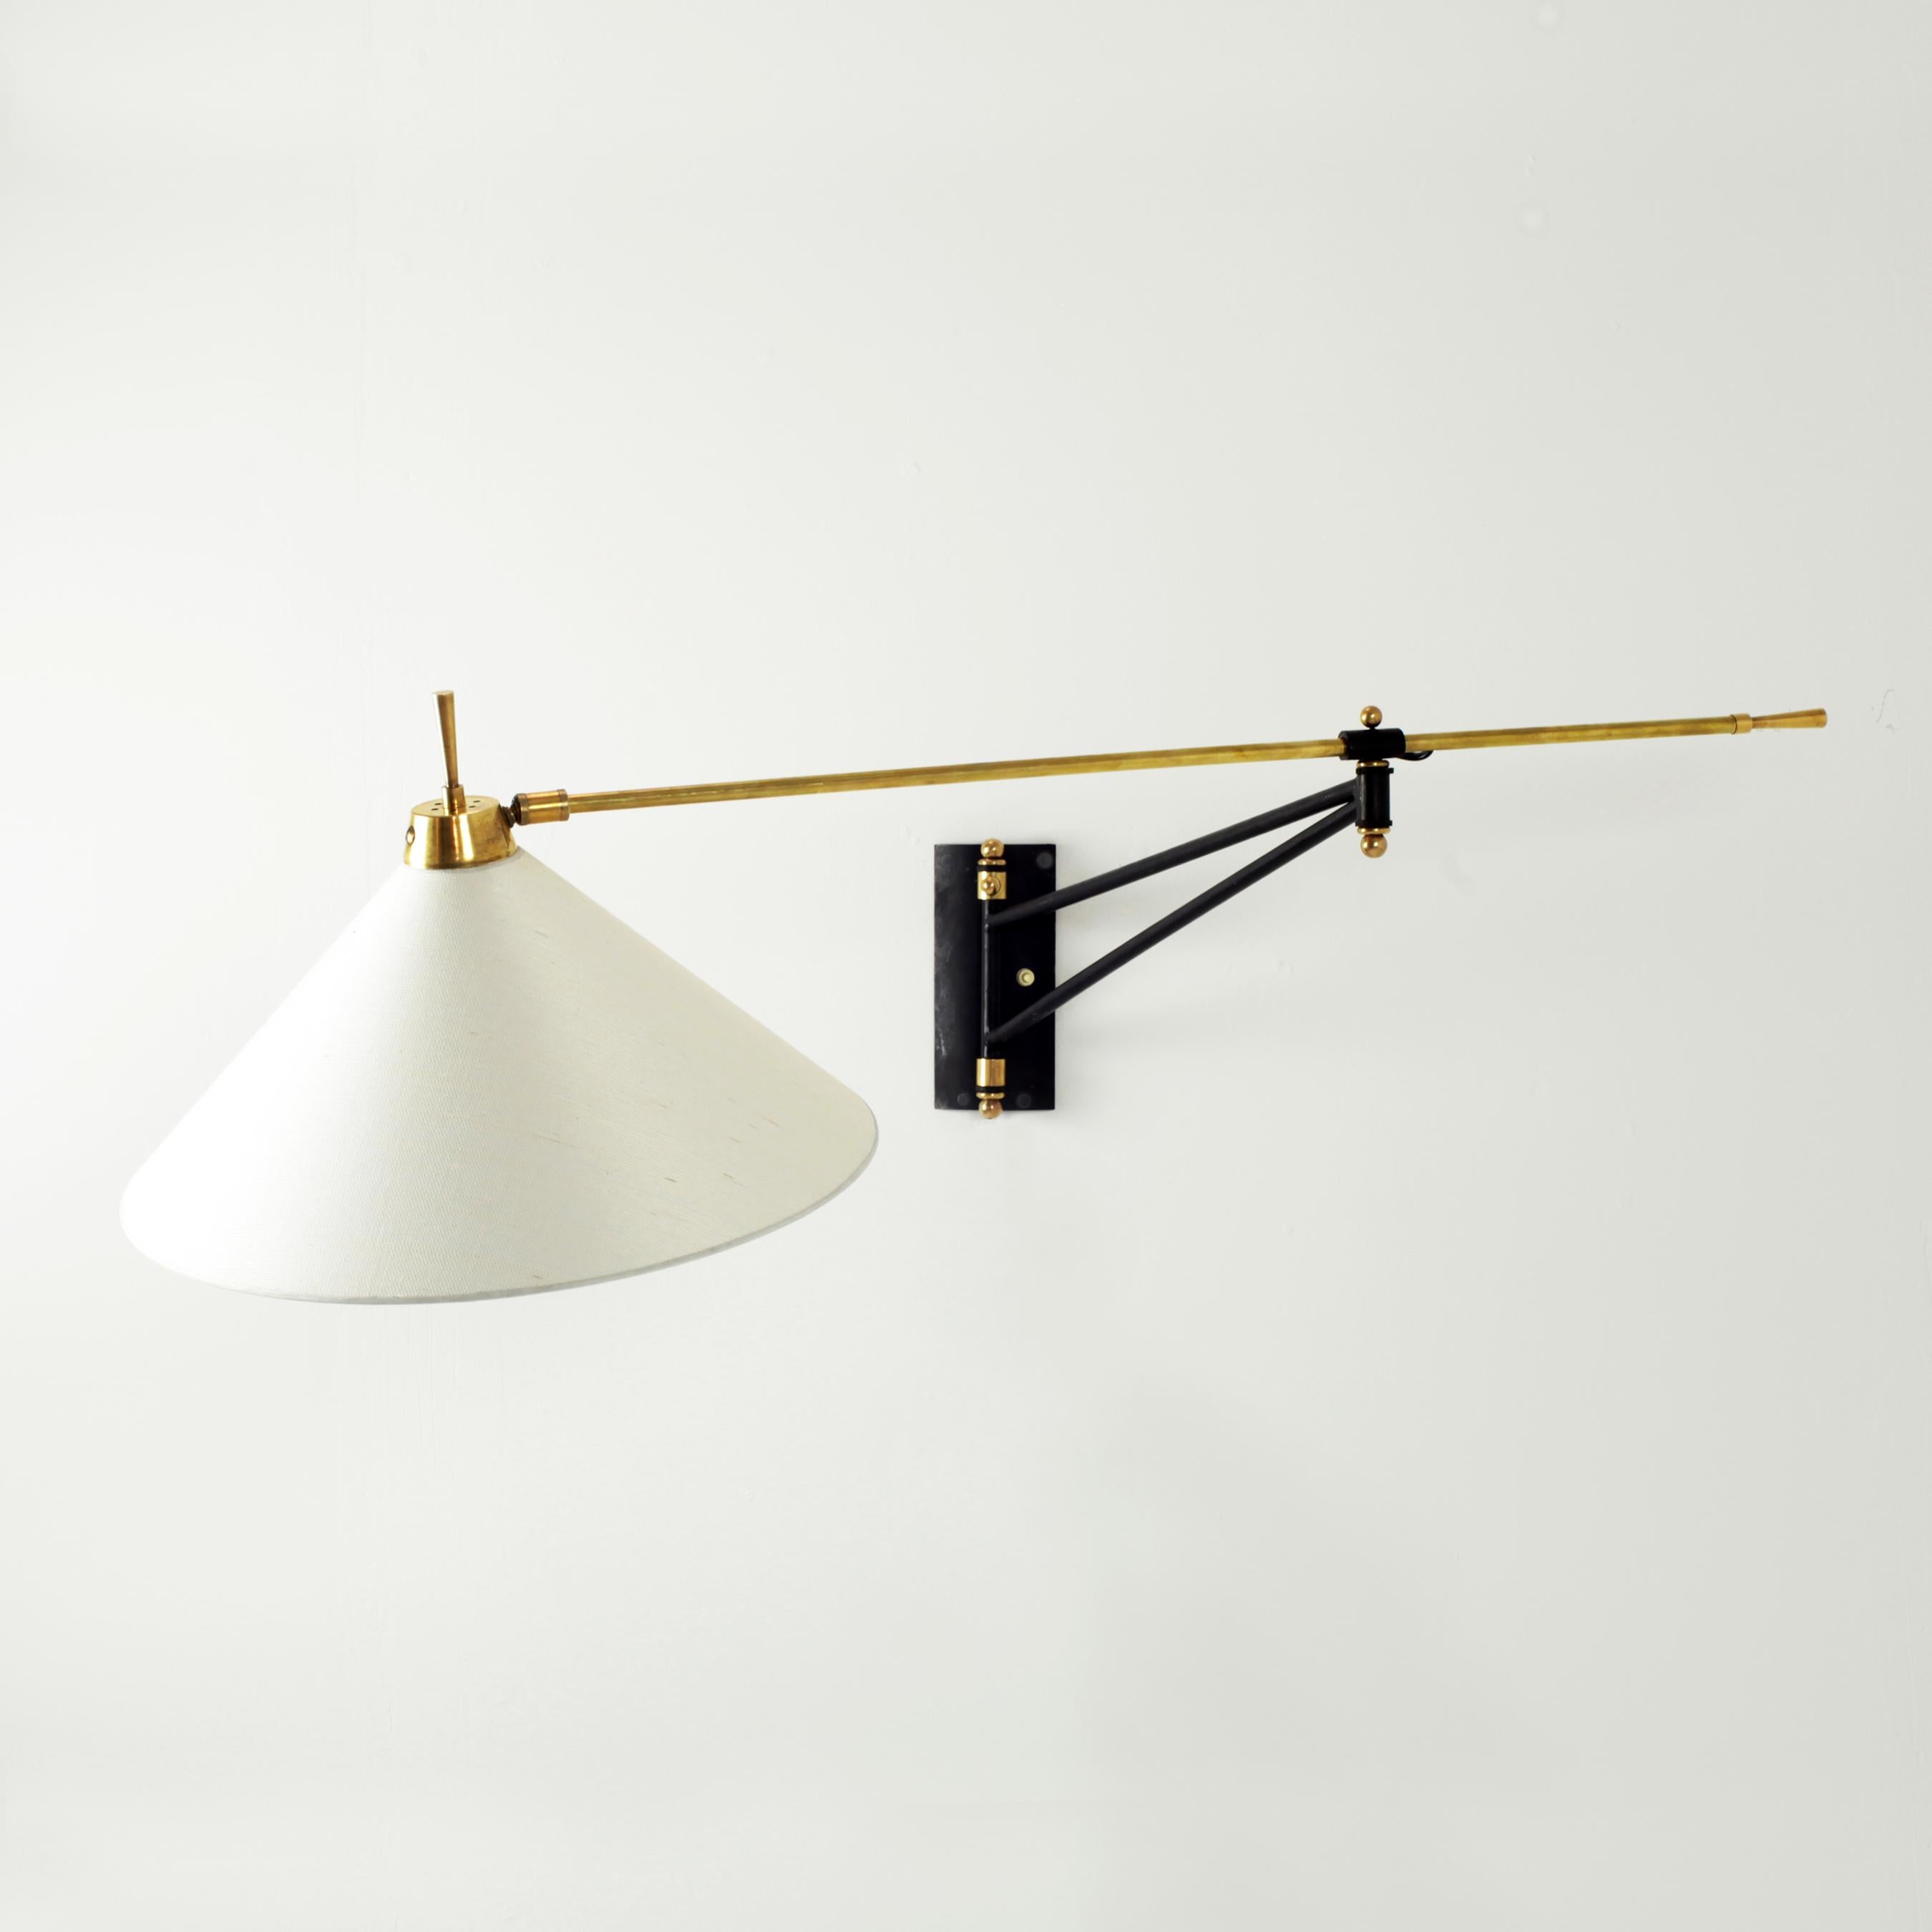 Big French wall lamp from the 1950s with swing arm, black steel and brass detail, new handmade lampshades in Japanese paper.
The lamp uses French bayonet bulb (B22).
Measures: Total length 136 cm
Shade: height 35 cm, diameter 45 cm.